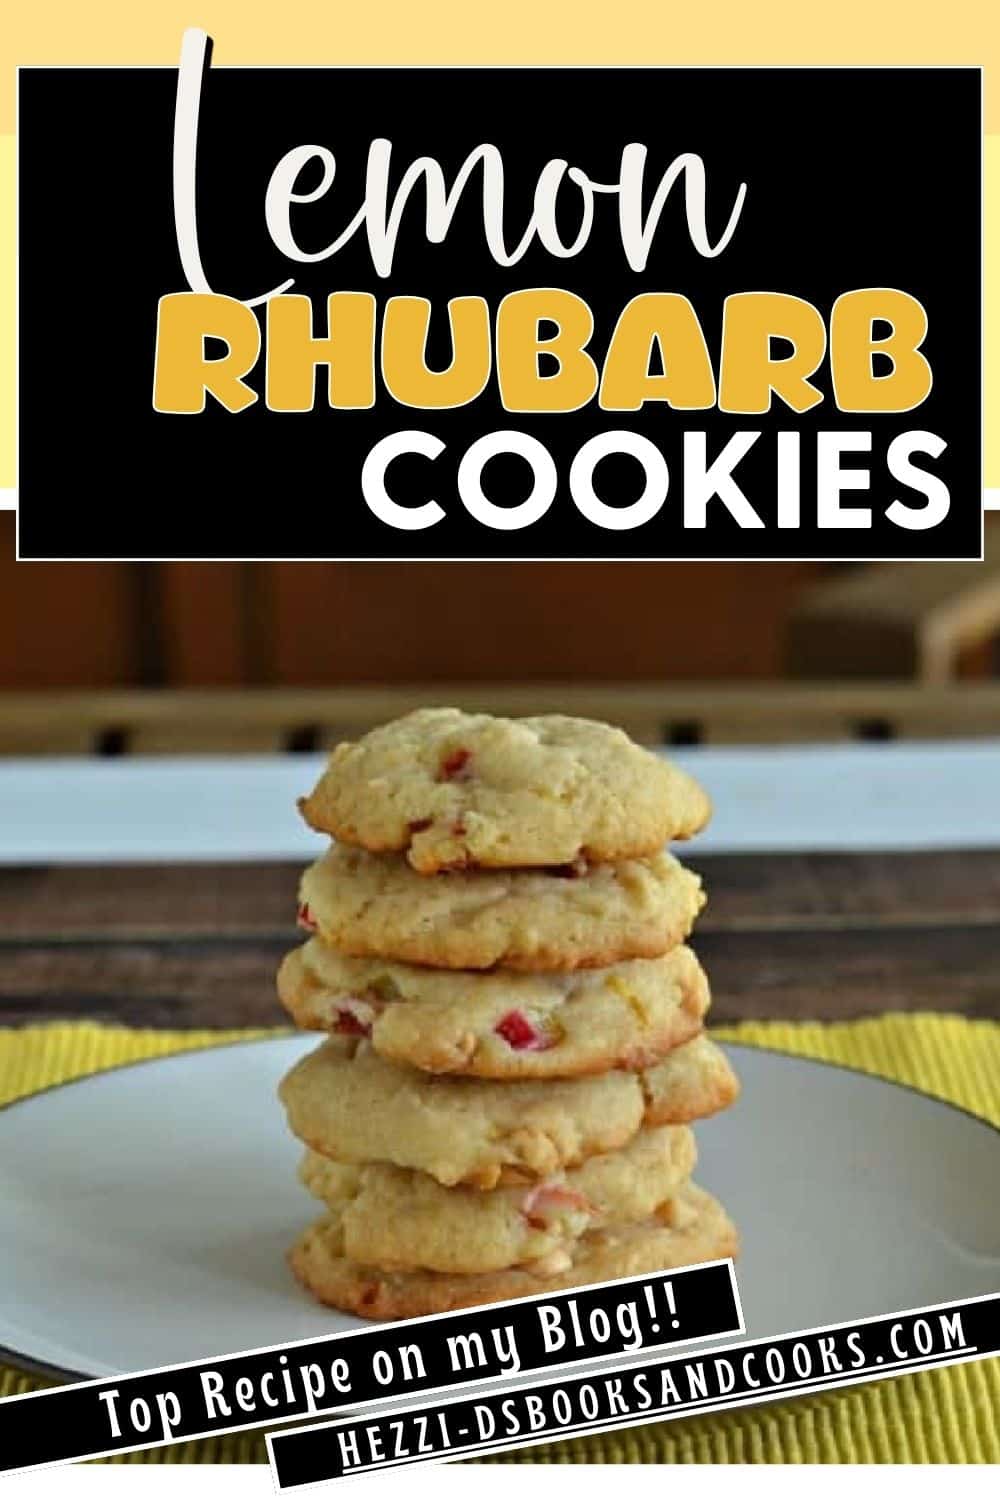 Pin Image: Text title, a stack of lemon rhubarb cookies.